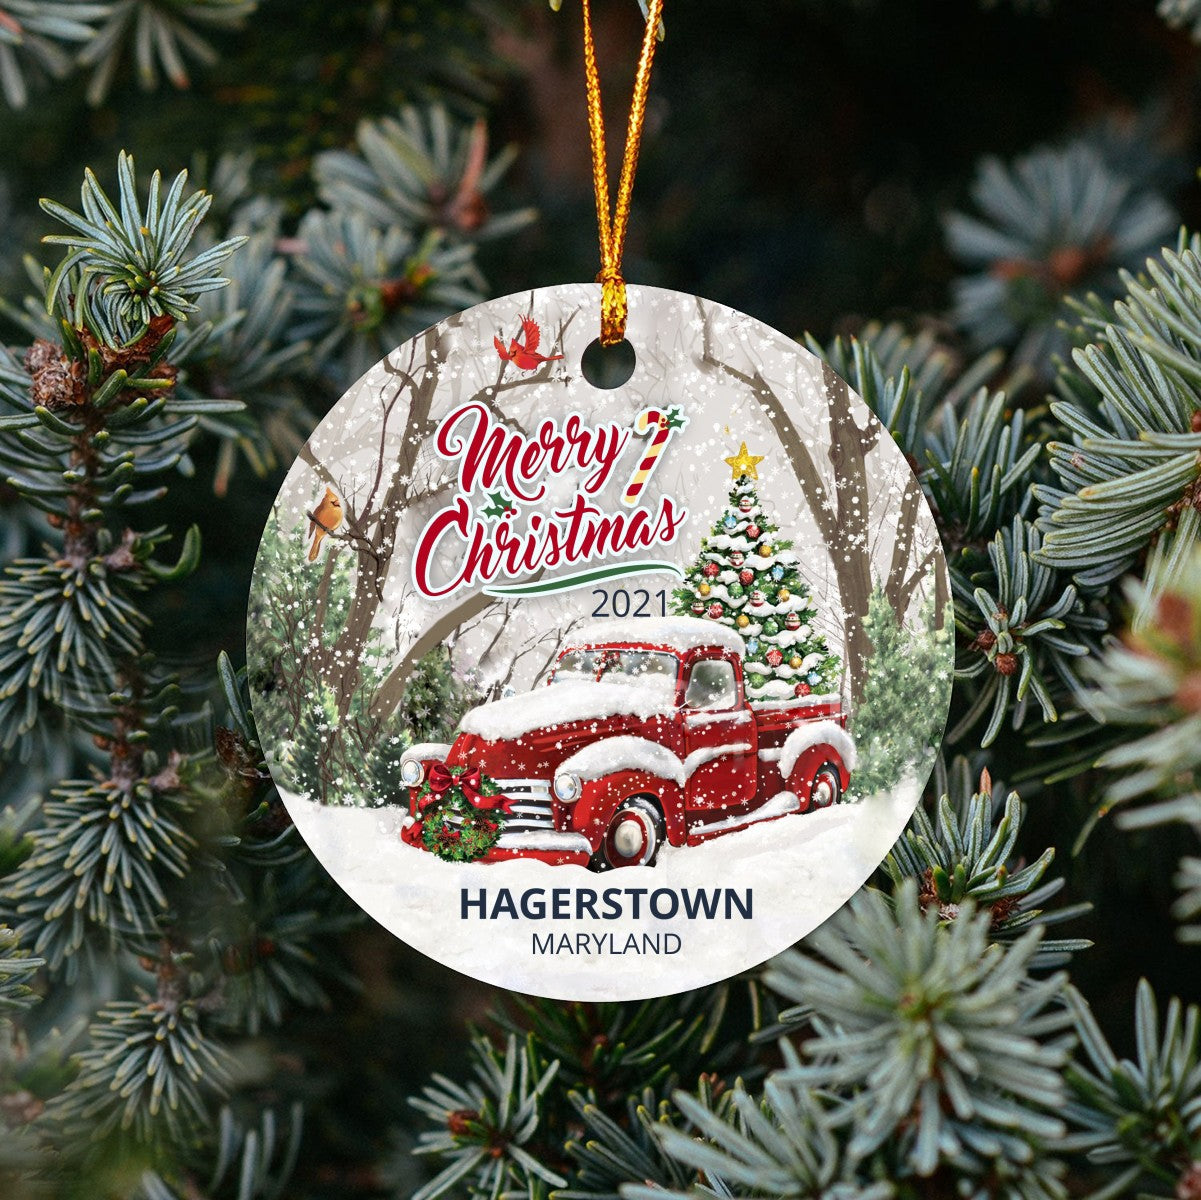 Christmas Tree Ornaments Hagerstown - Ornament Customize With Name City And State Hagerstown Maryland MD - Red Truck Xmas Ornaments 3'' Plastic Gift For Family, Friend And Housewarming